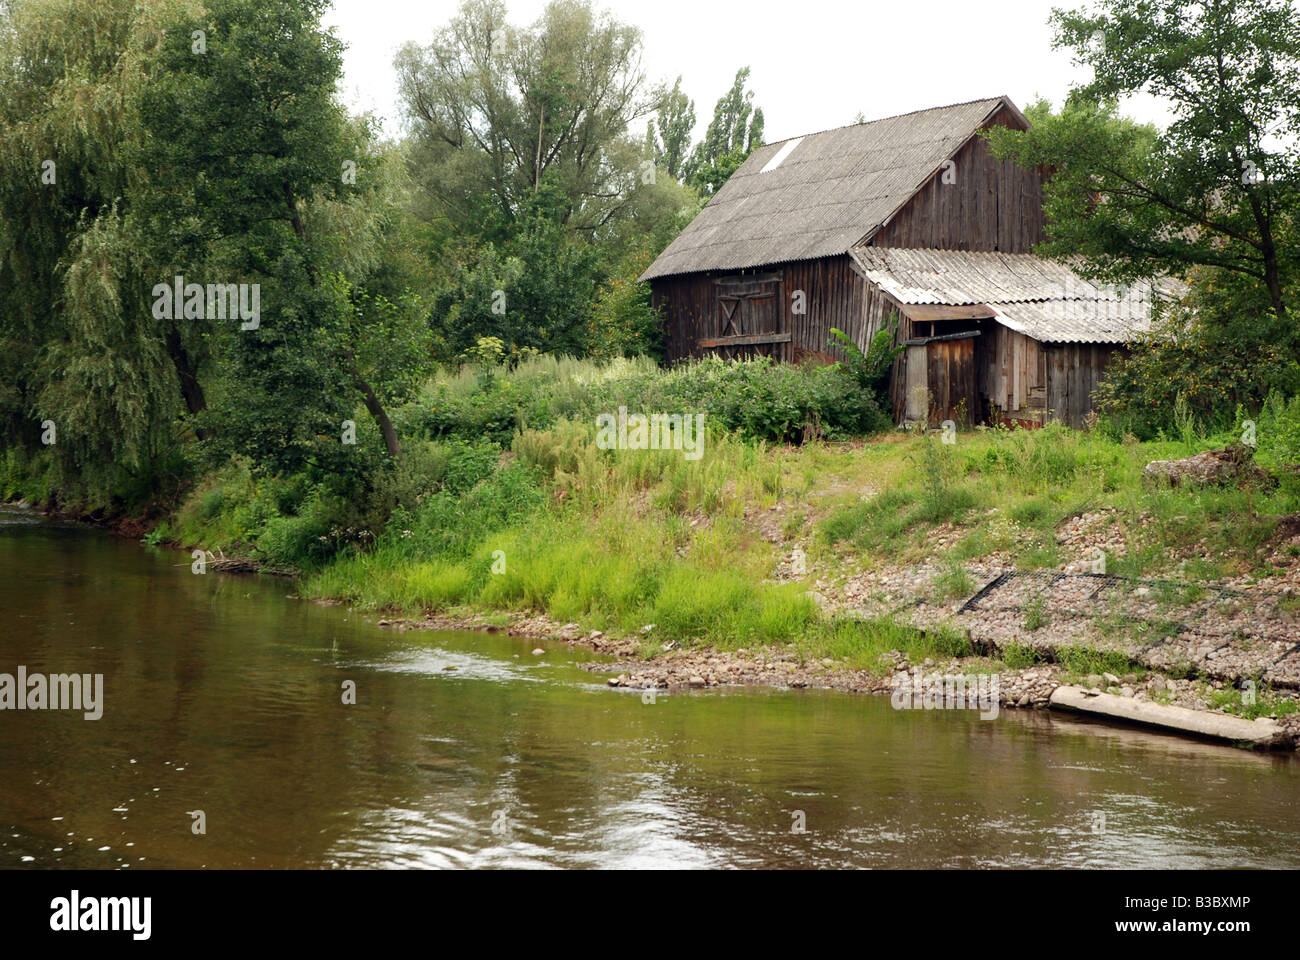 Old wooden barn standing close to Liwiec river bank, Masovia region in Poland Stock Photo